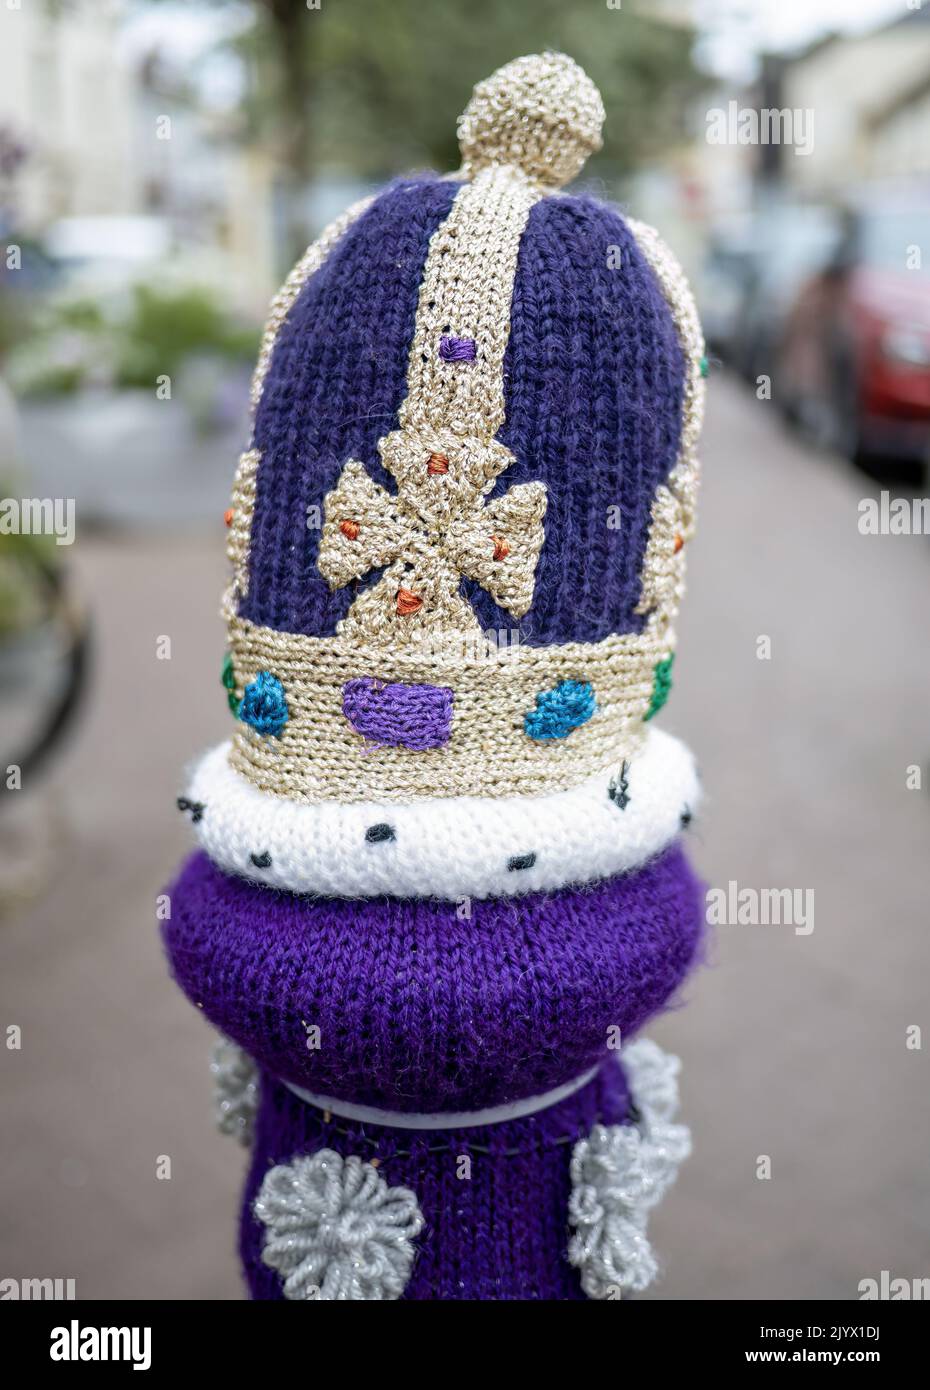 SOUTH MOLTON, DEVON, ENGLAND - AUGUST 2 2022: Post in street with knitted crown on top, yarn bombing. Stock Photo